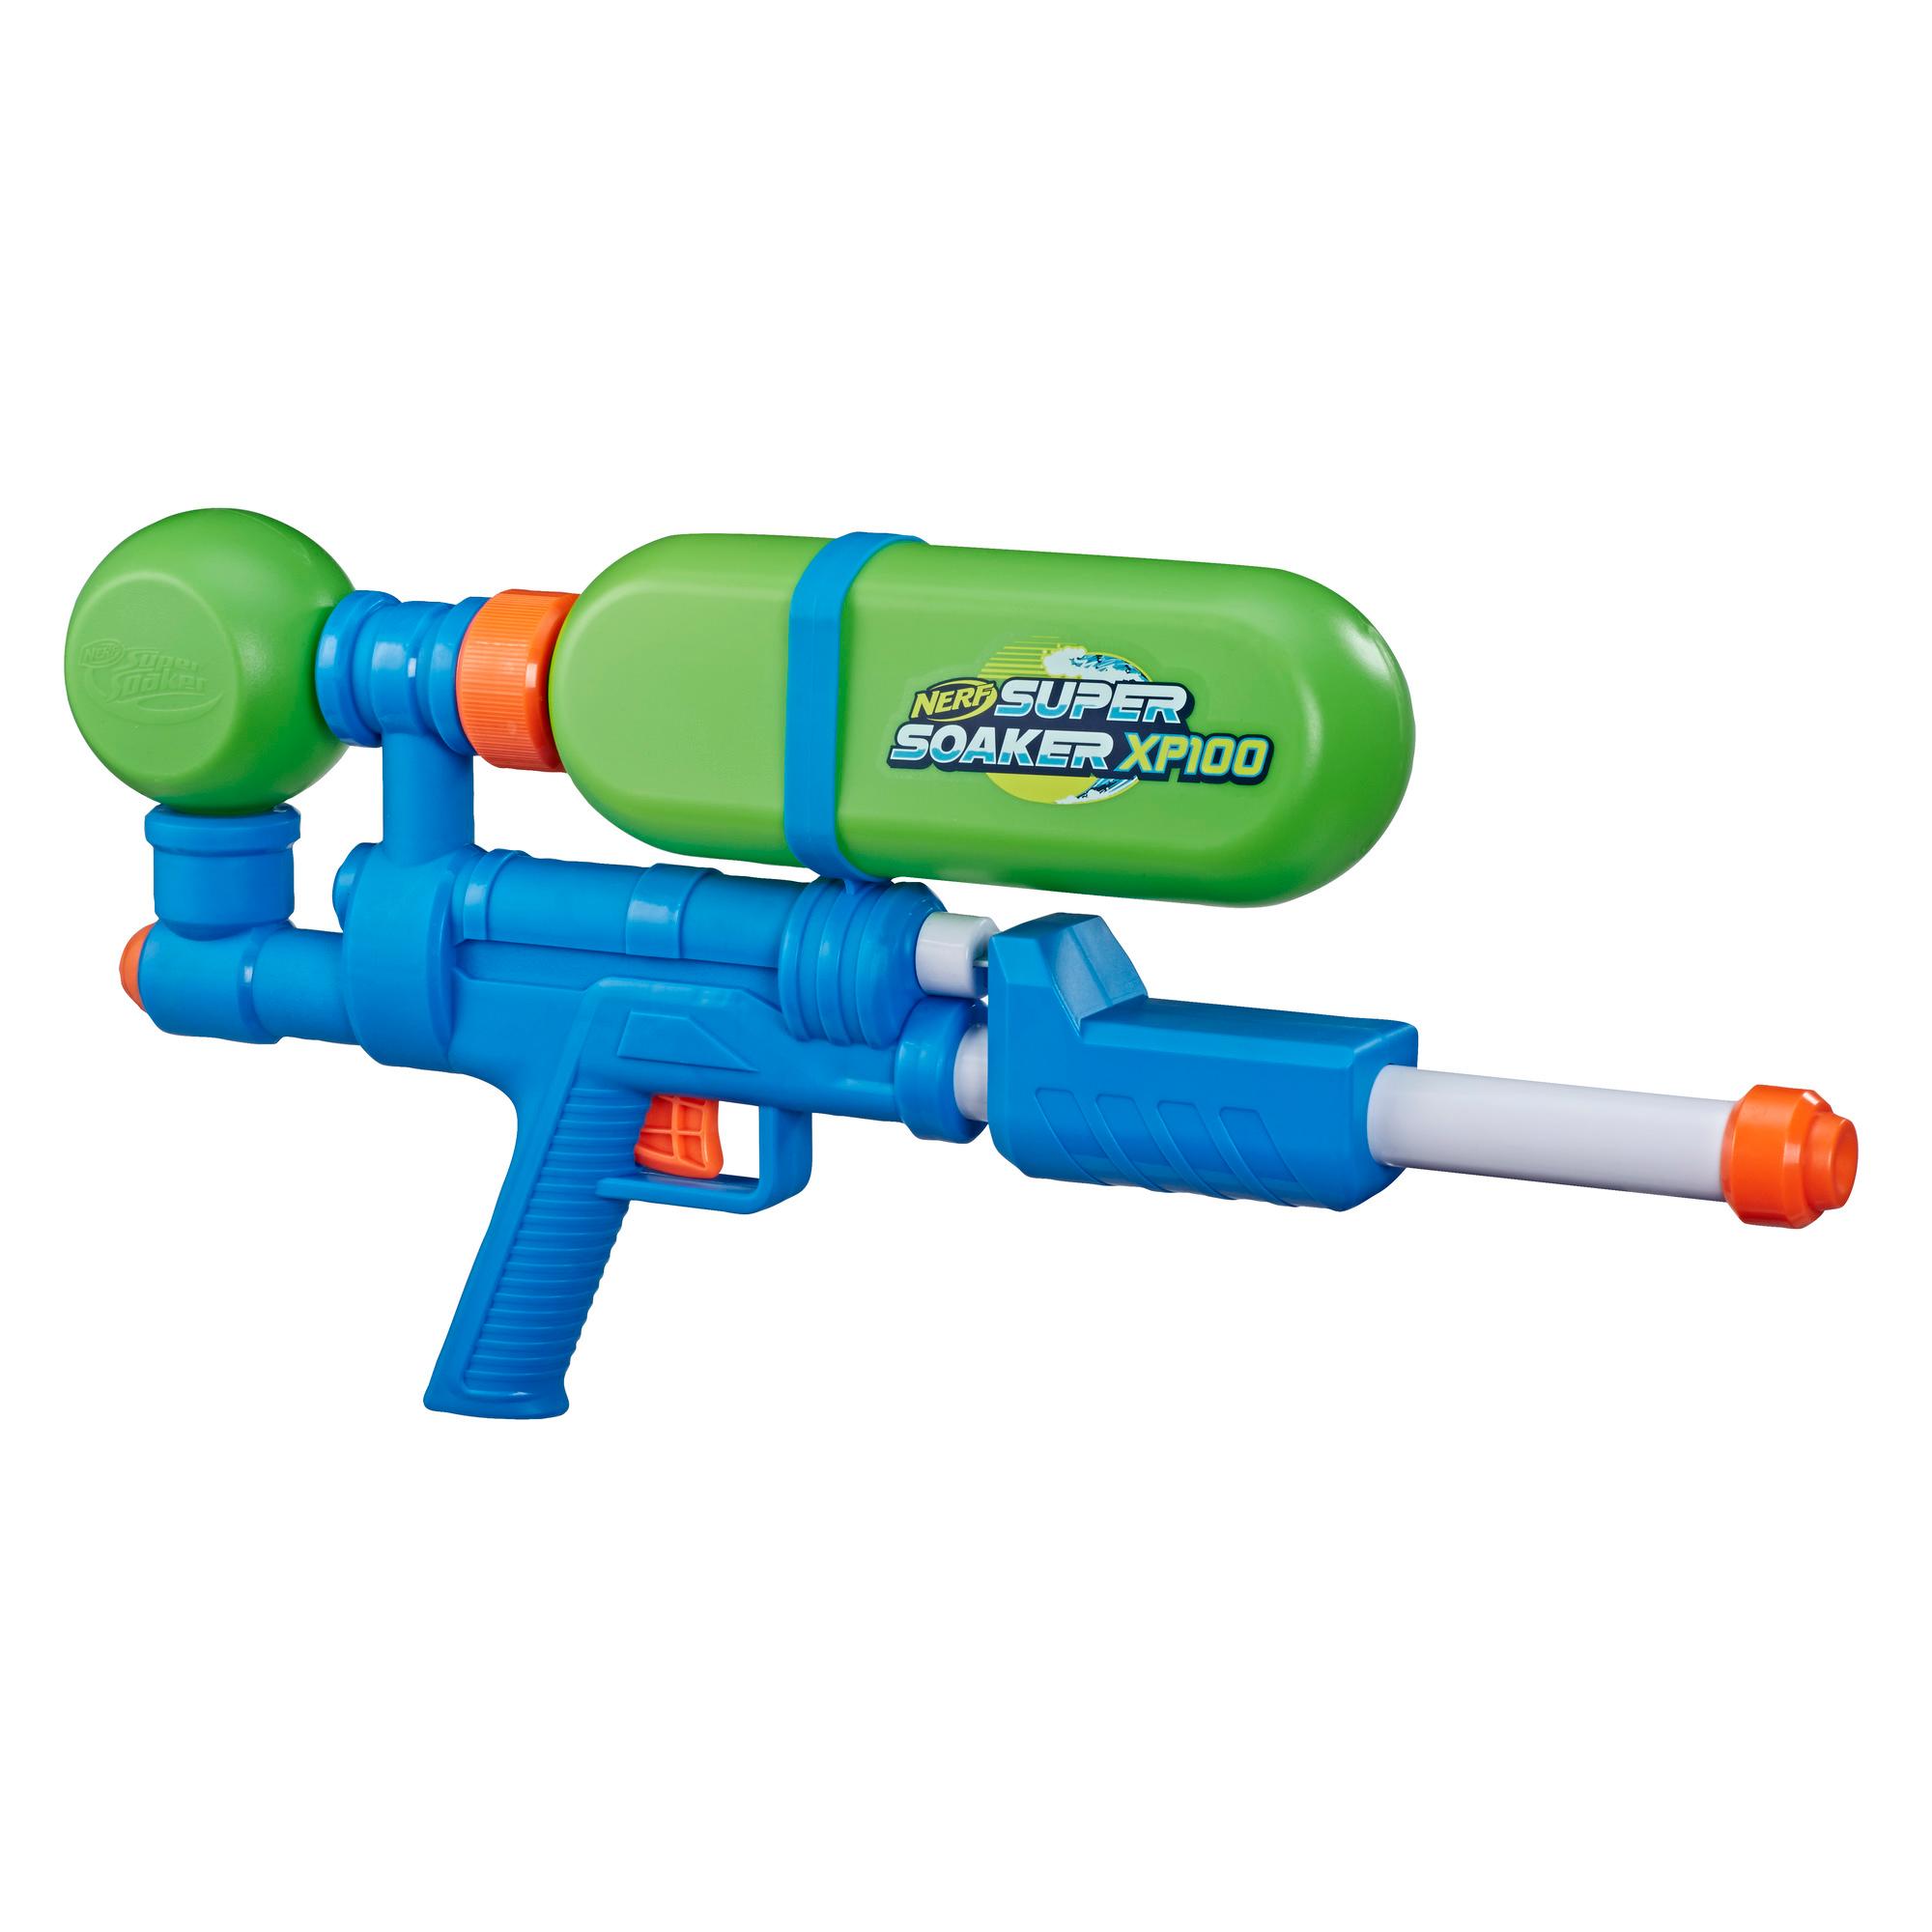 Nerf Super Soaker Xp100 Water Blaster Air Pressurized Continuous Blast Removable Tank For Kids Teens Adults Nerf